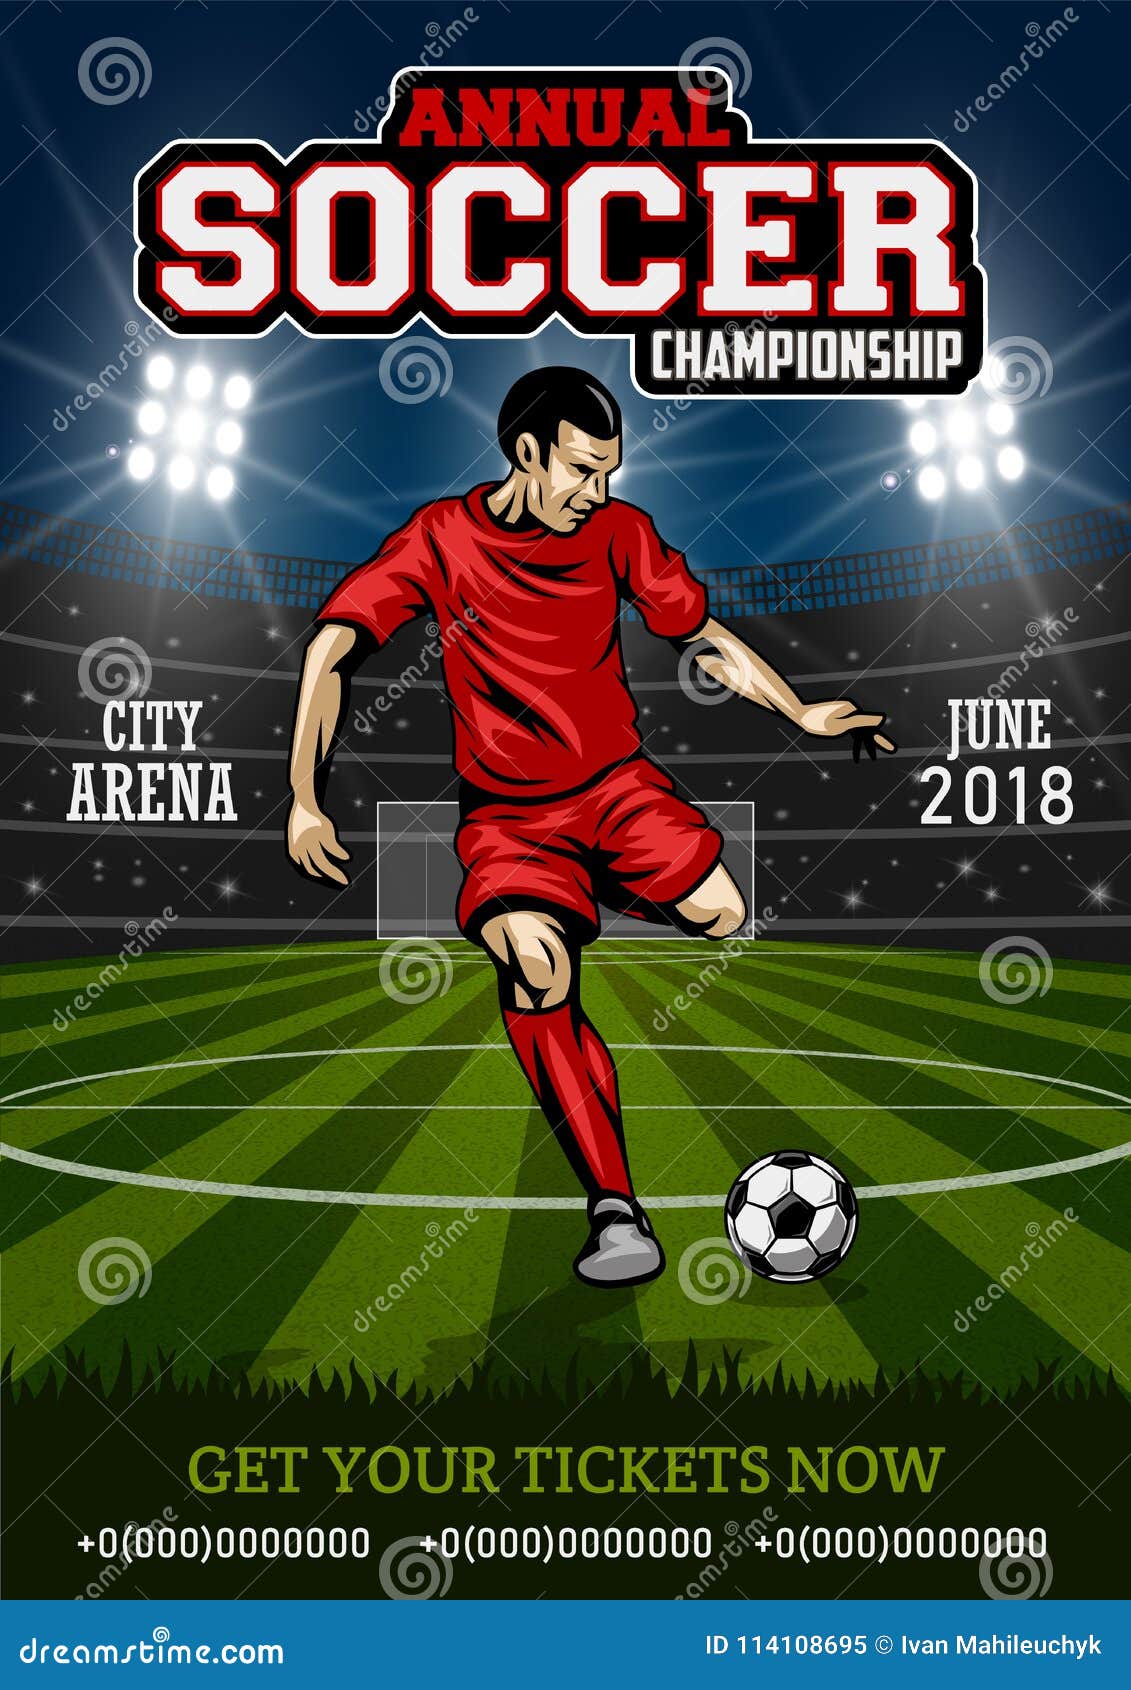 Football poster Vectors & Illustrations for Free Download